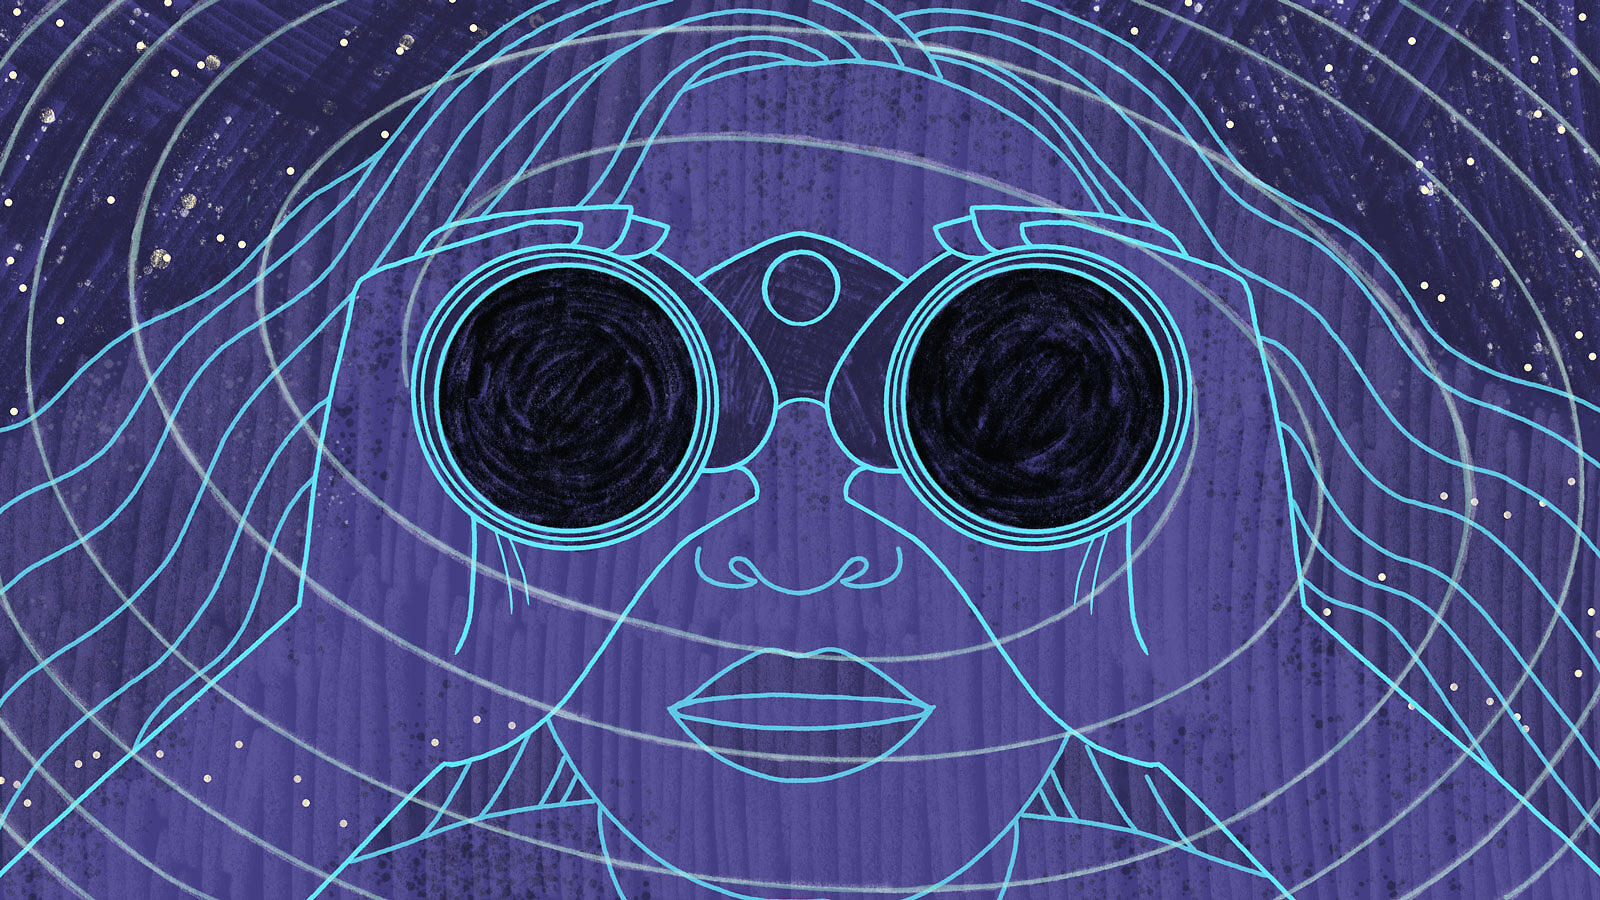 Illustration of a woman looking through binoculars with black holes as lenses